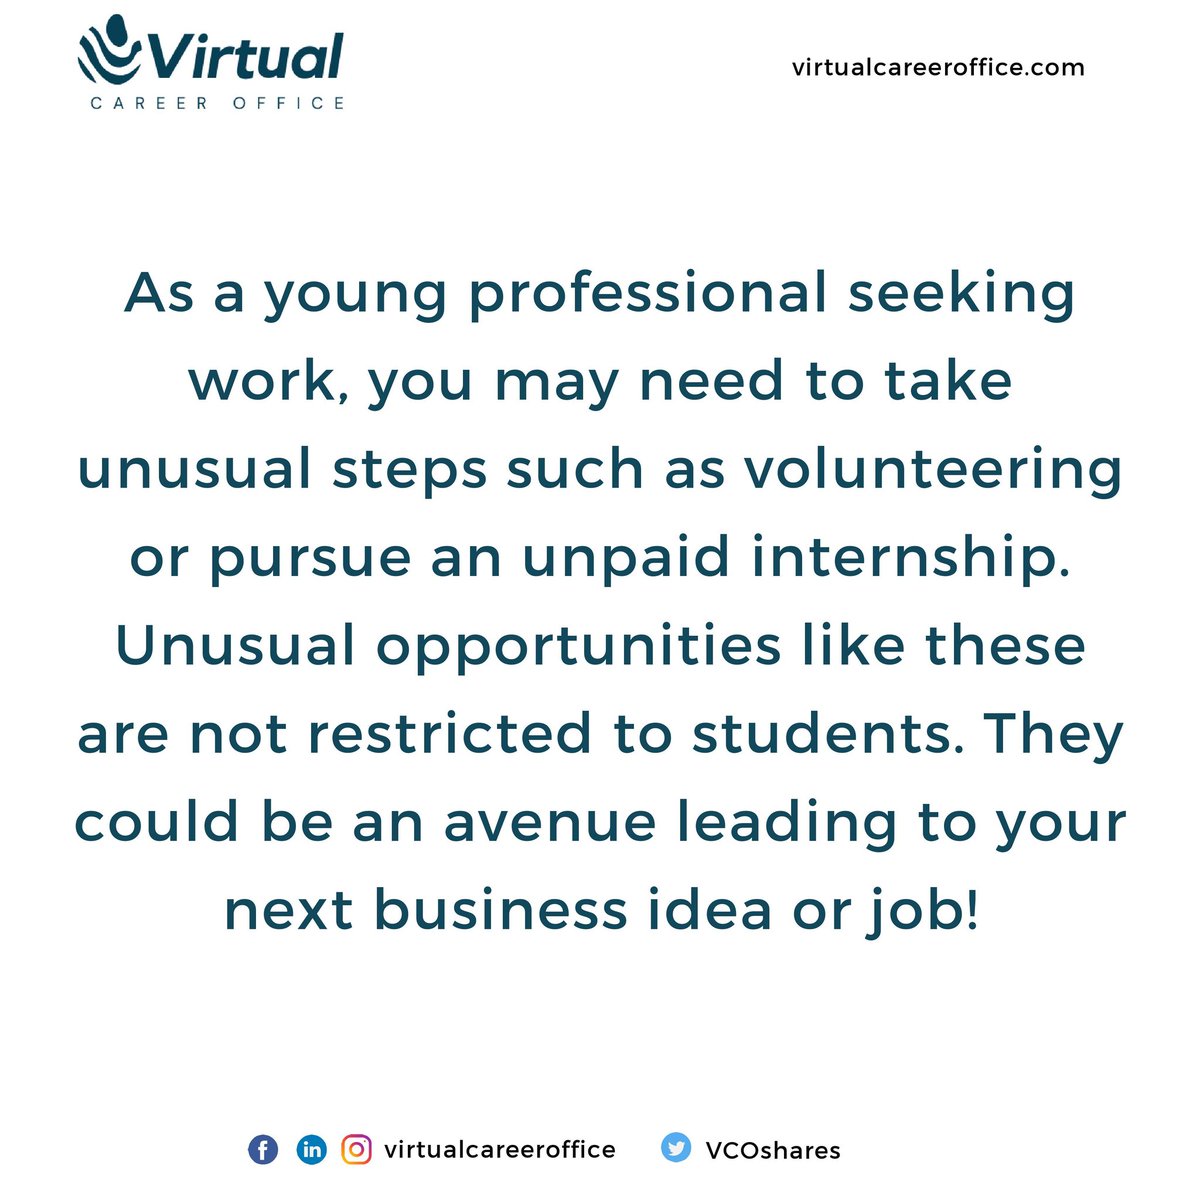 Make some unconventional moves to acheive your career goals.
#vcoshares #careeradvising #careerdiscovery